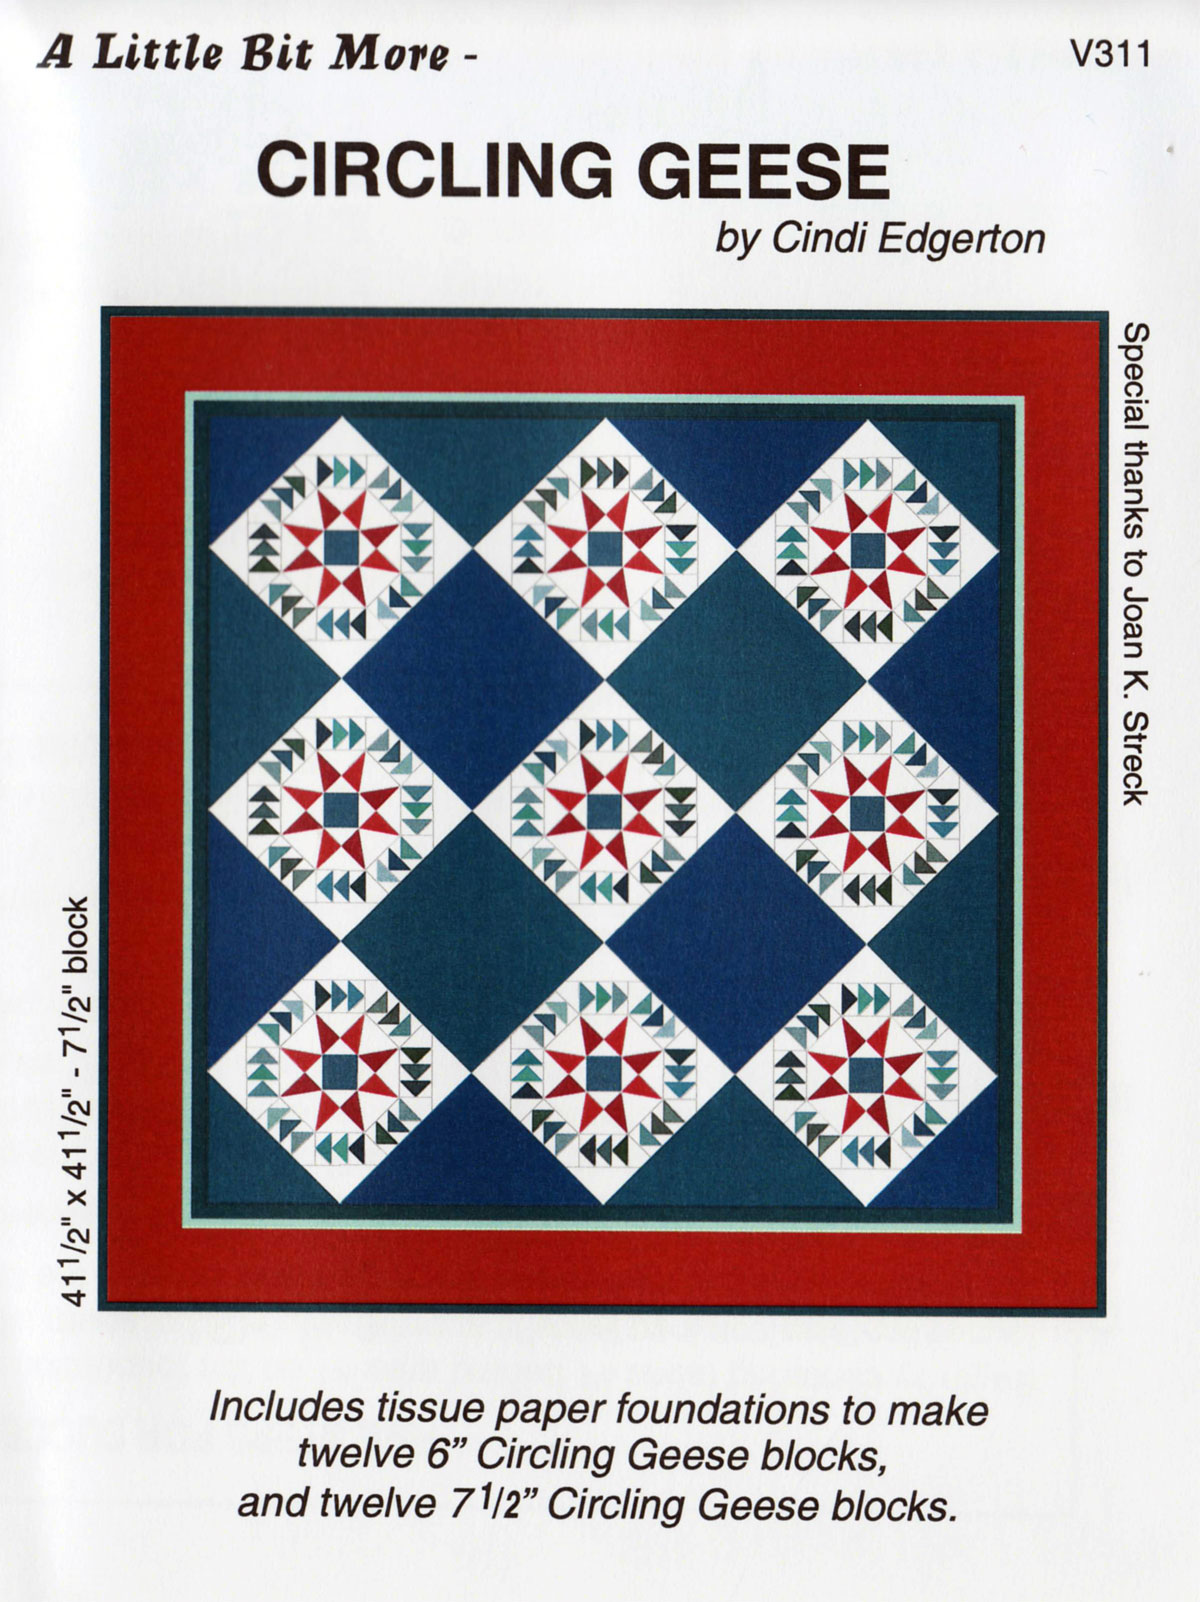 A-Little-Bit-More-Circling-Geese-quilt-sewing-pattern-Cindi-Edgerton-front